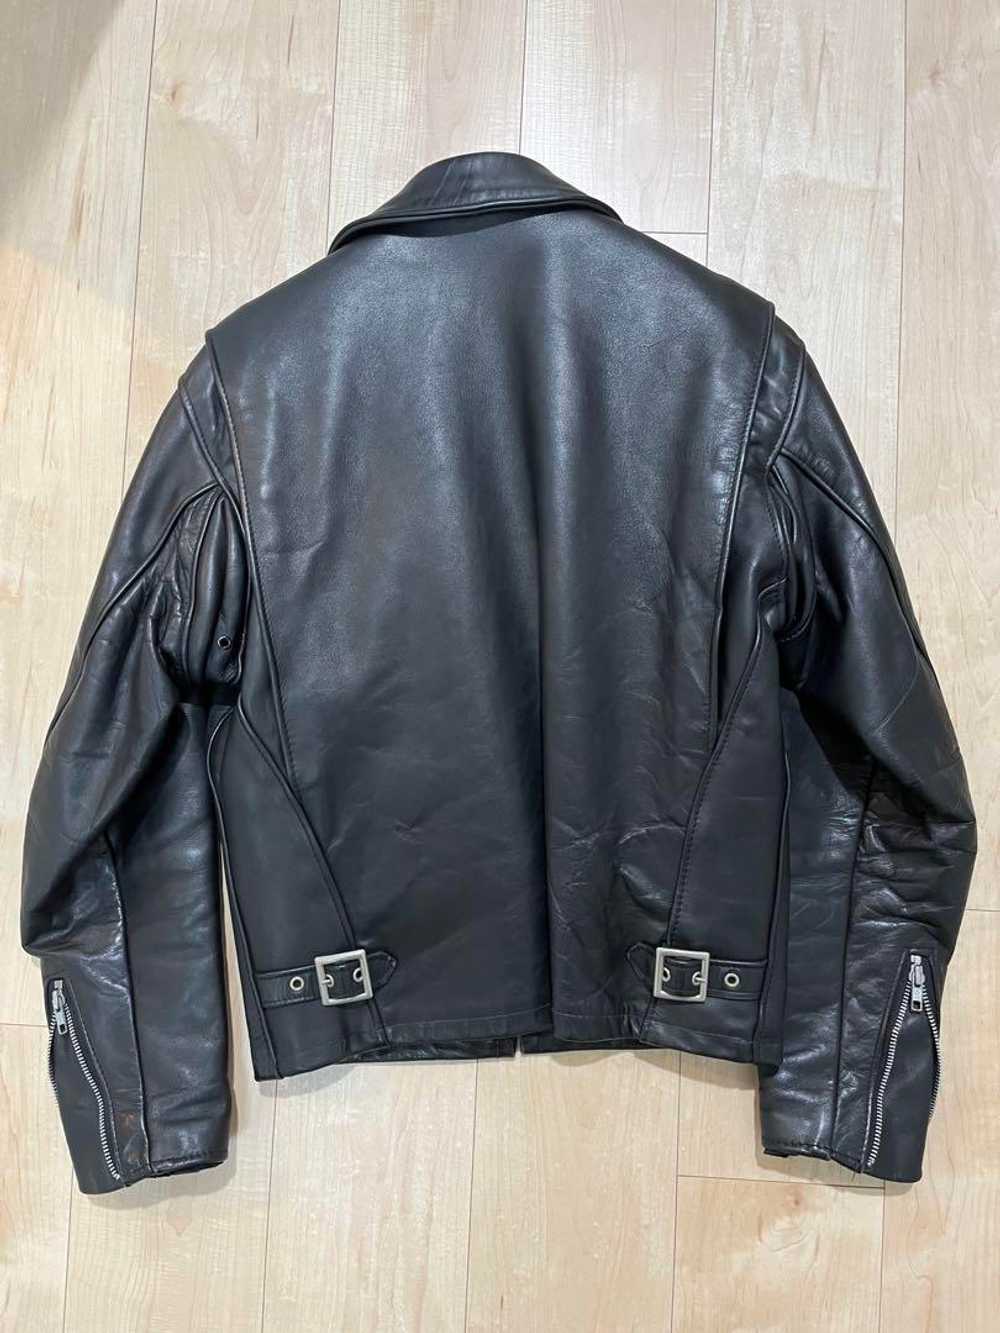 Schott 643E 36 Size Leather Jacket With Liner - image 2